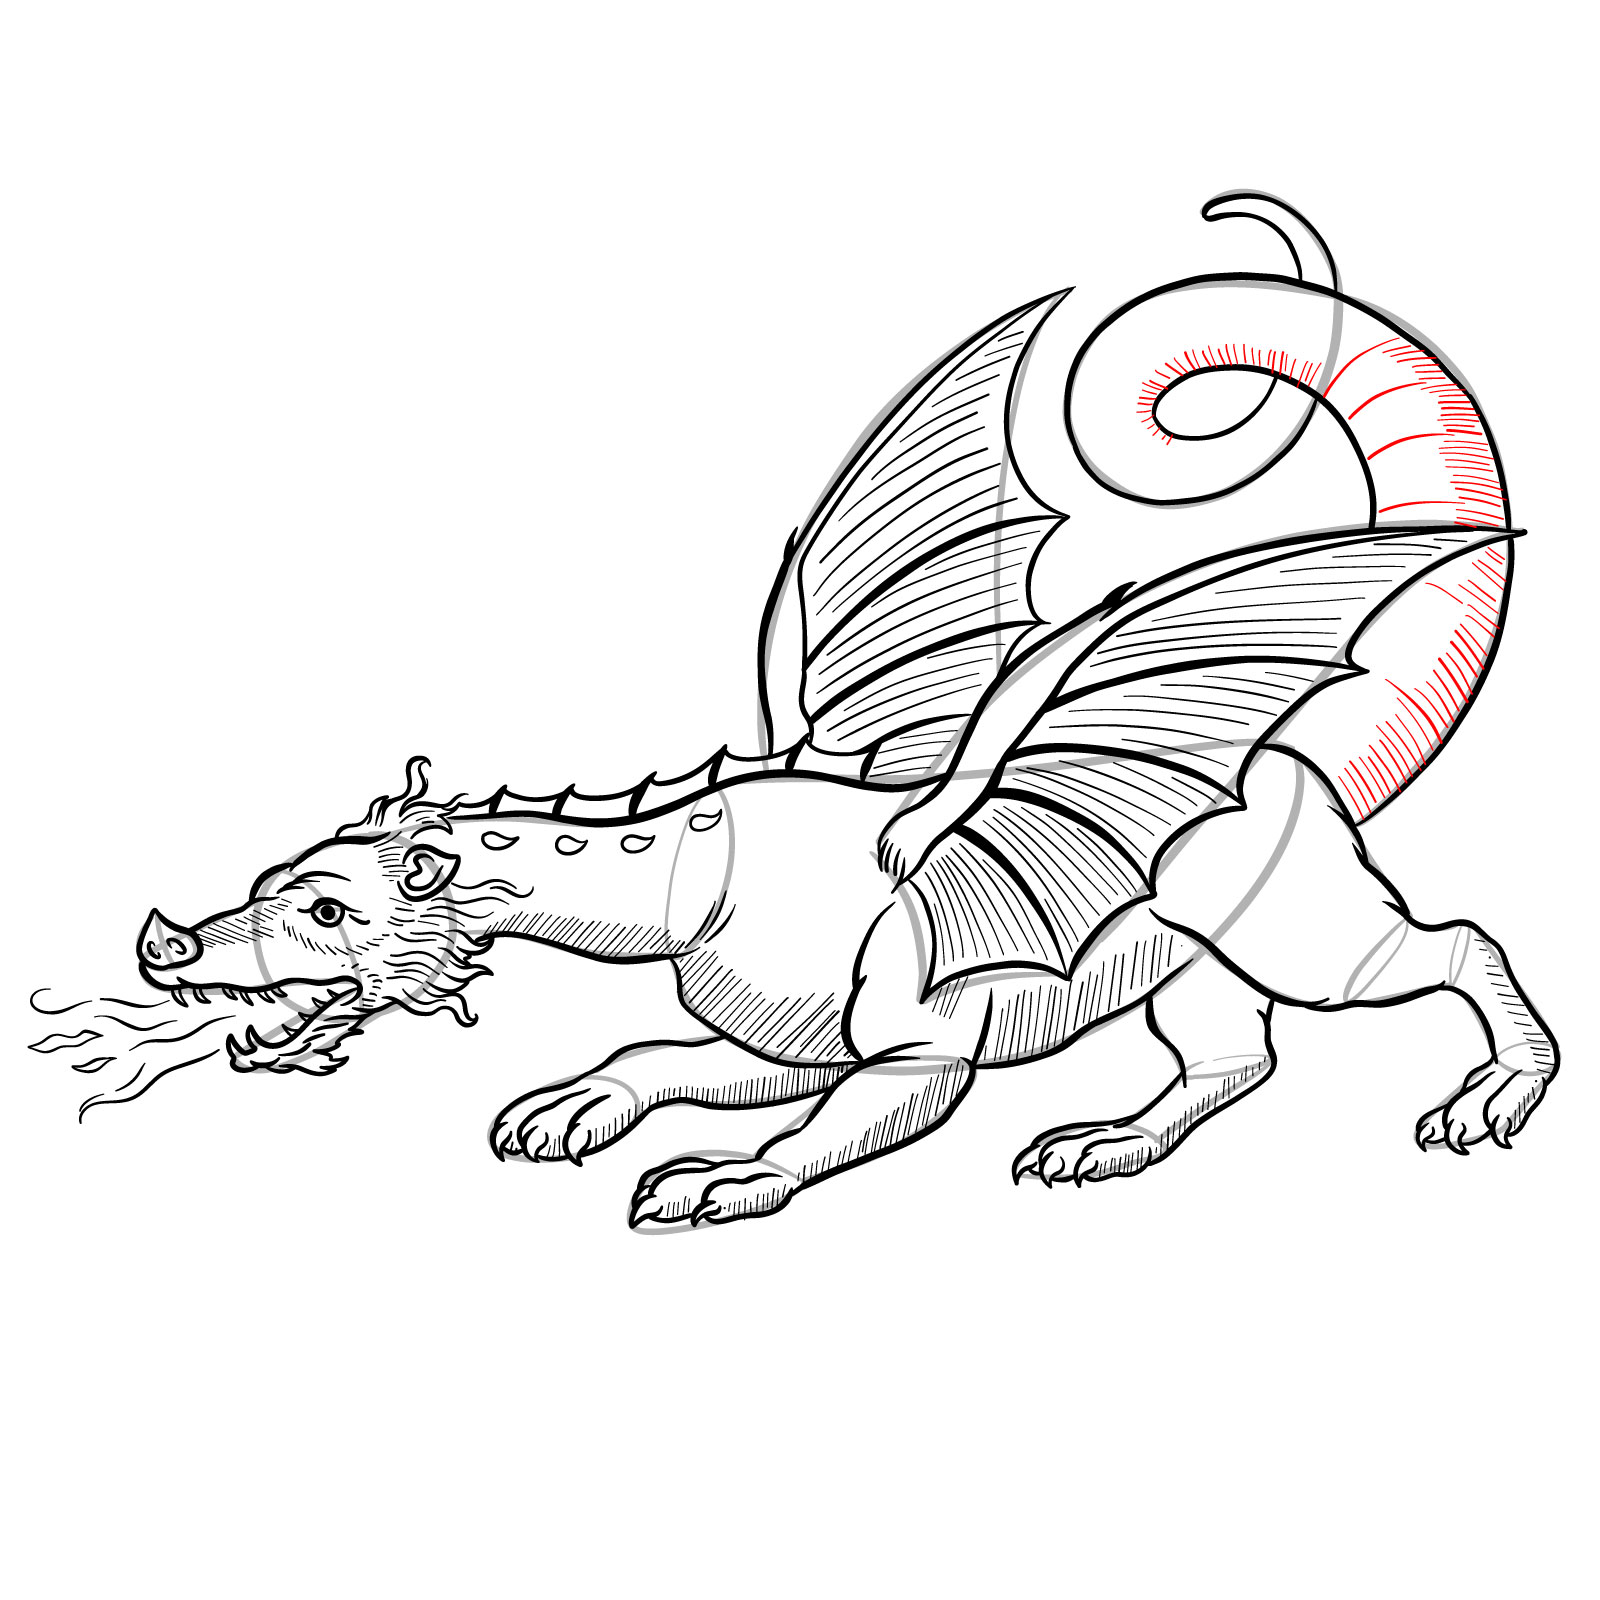 How to draw a classic European dragon - step 45